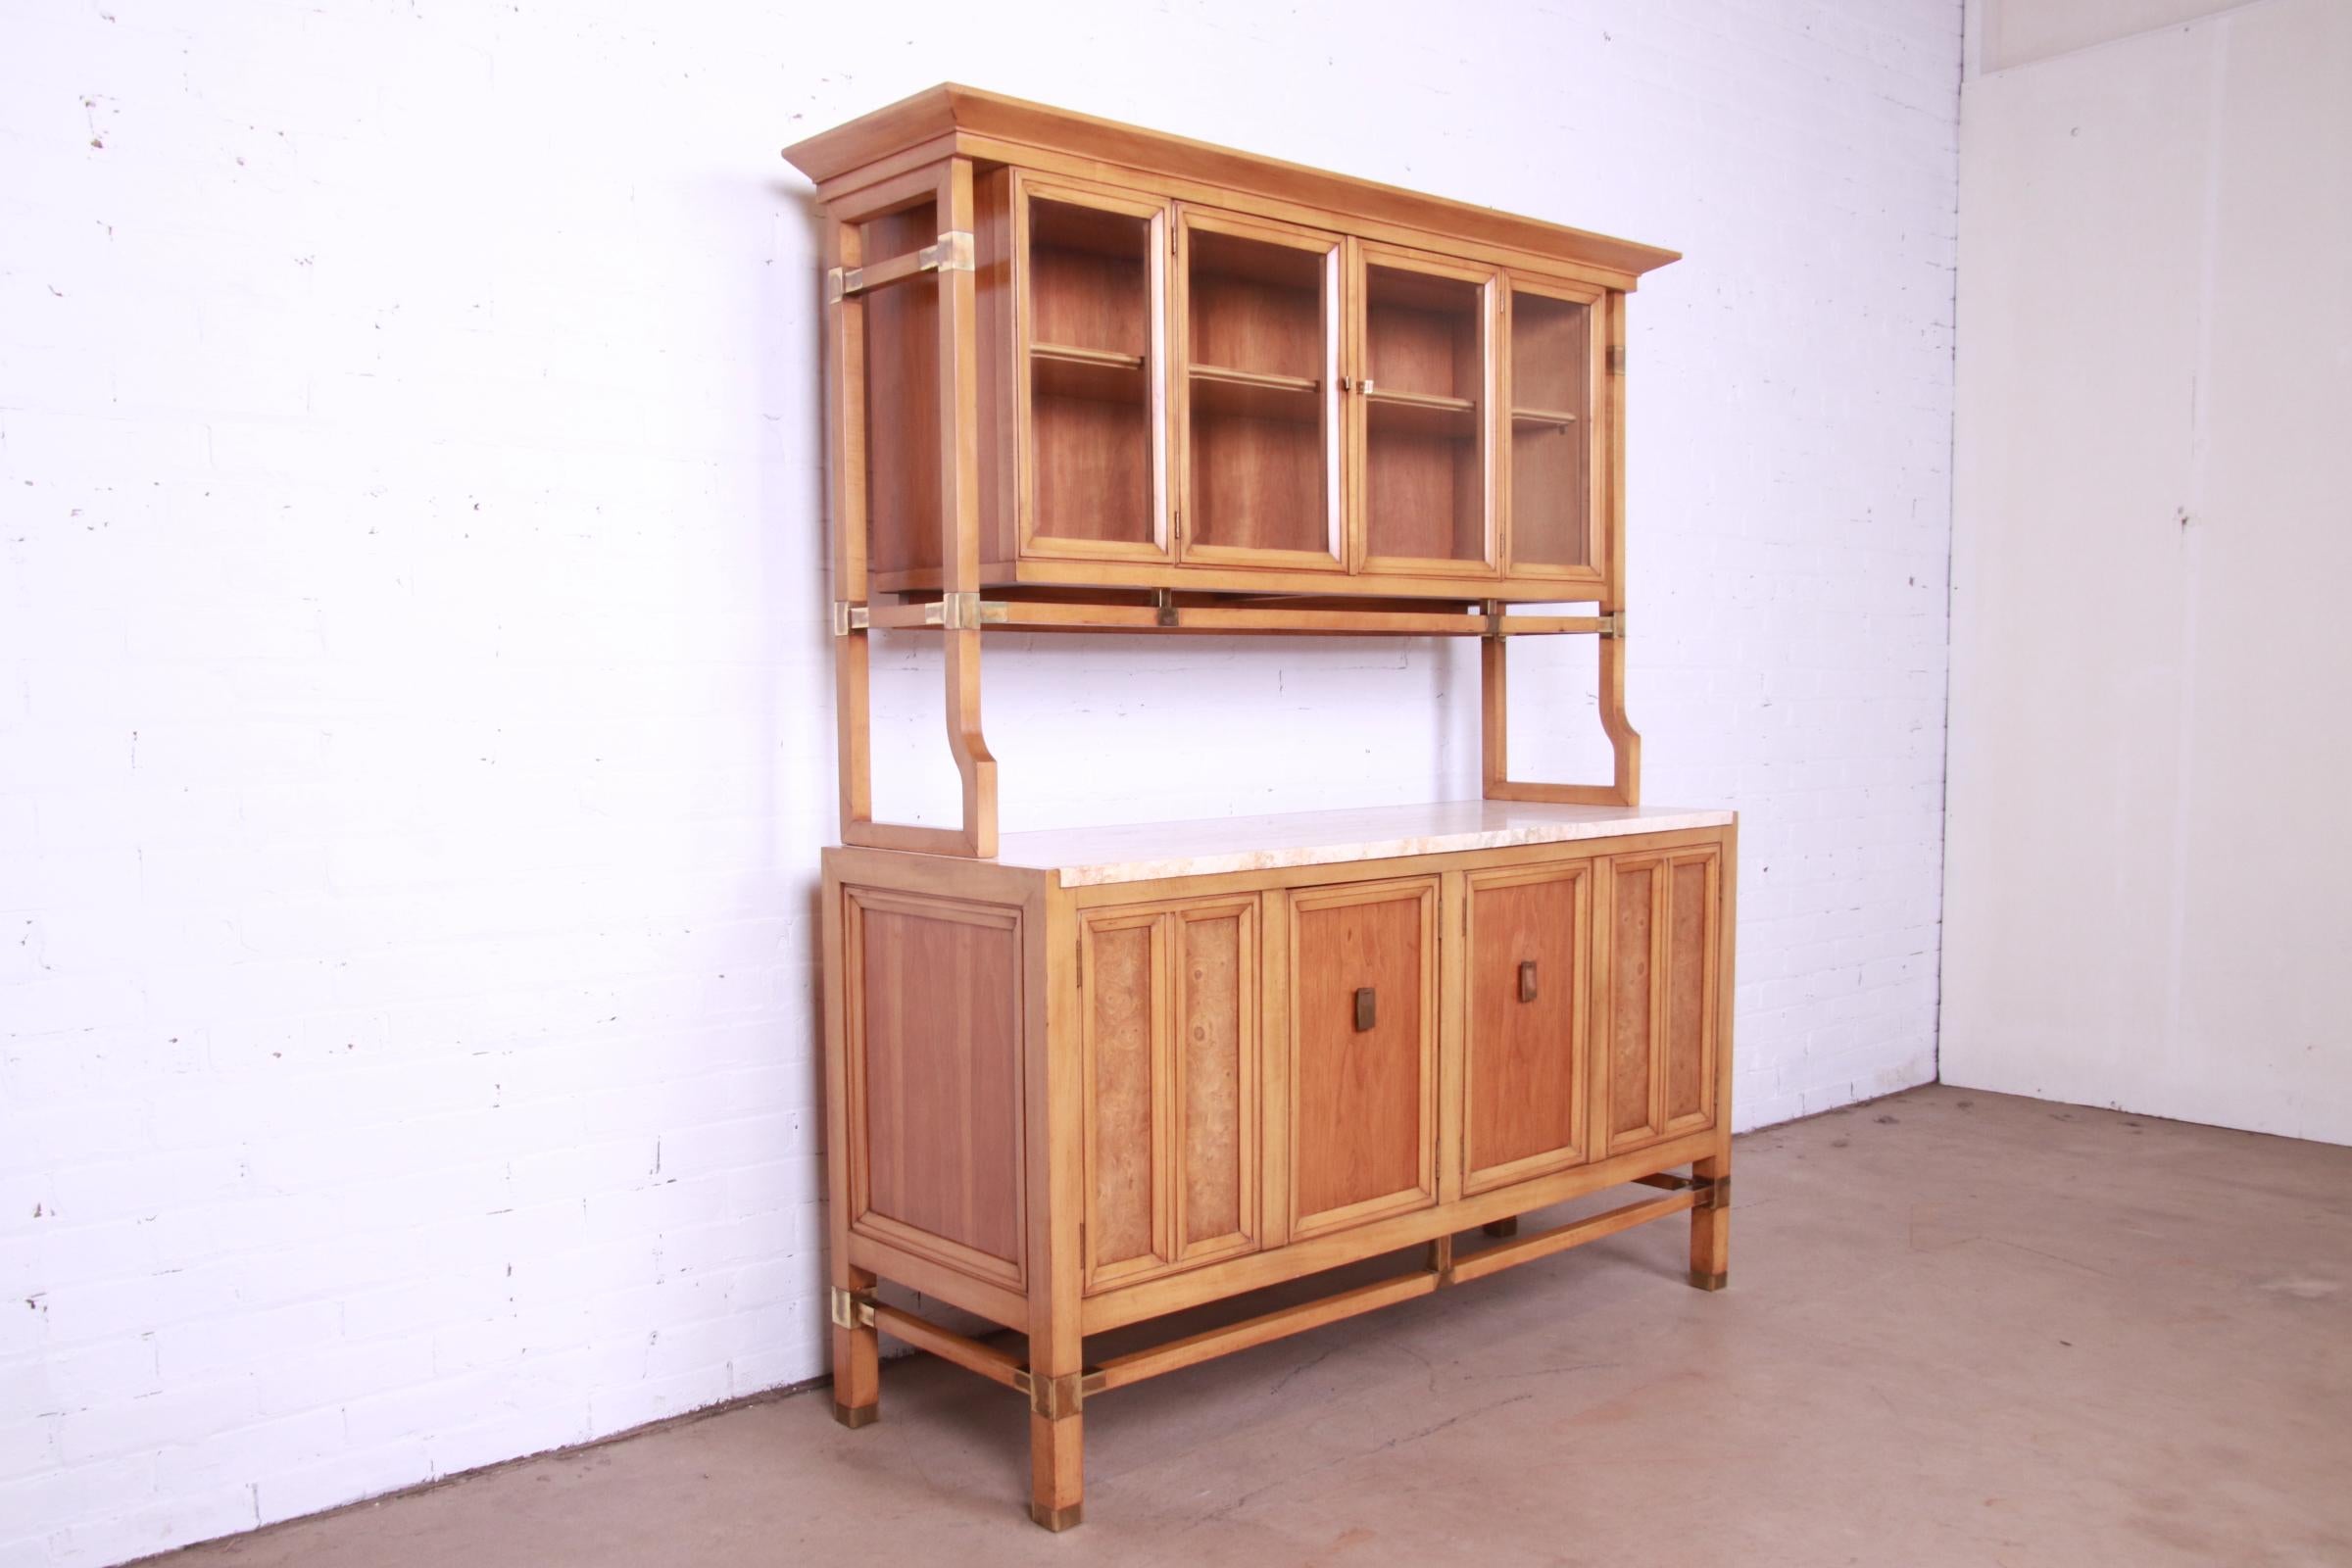 Mid-20th Century J.L. Metz Sideboard or Bar Cabinet in Cherry, Burl, Travertine, and Brass